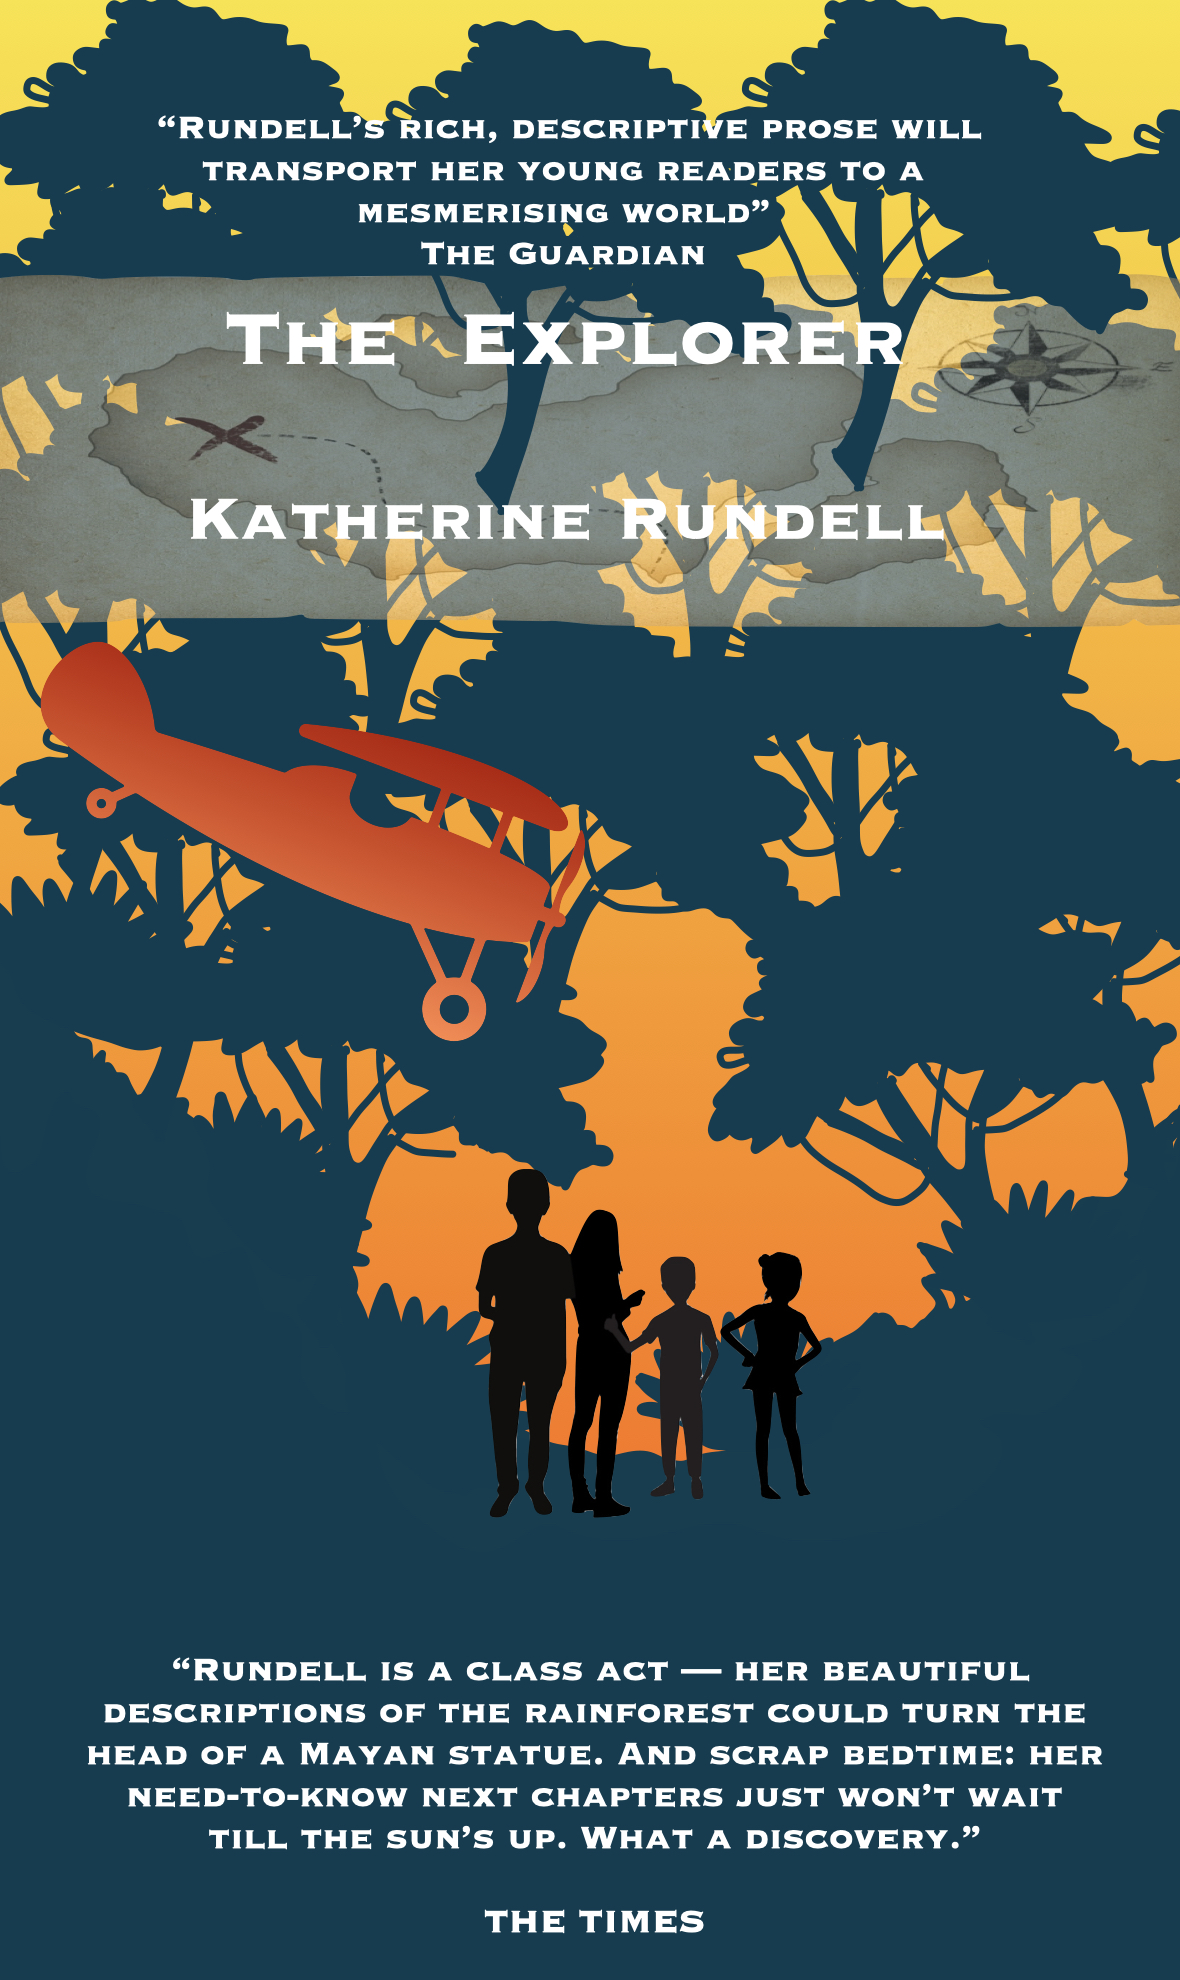 Book cover showing a plane and 4 children lost after a plane crash.  The cover also contains quotes 